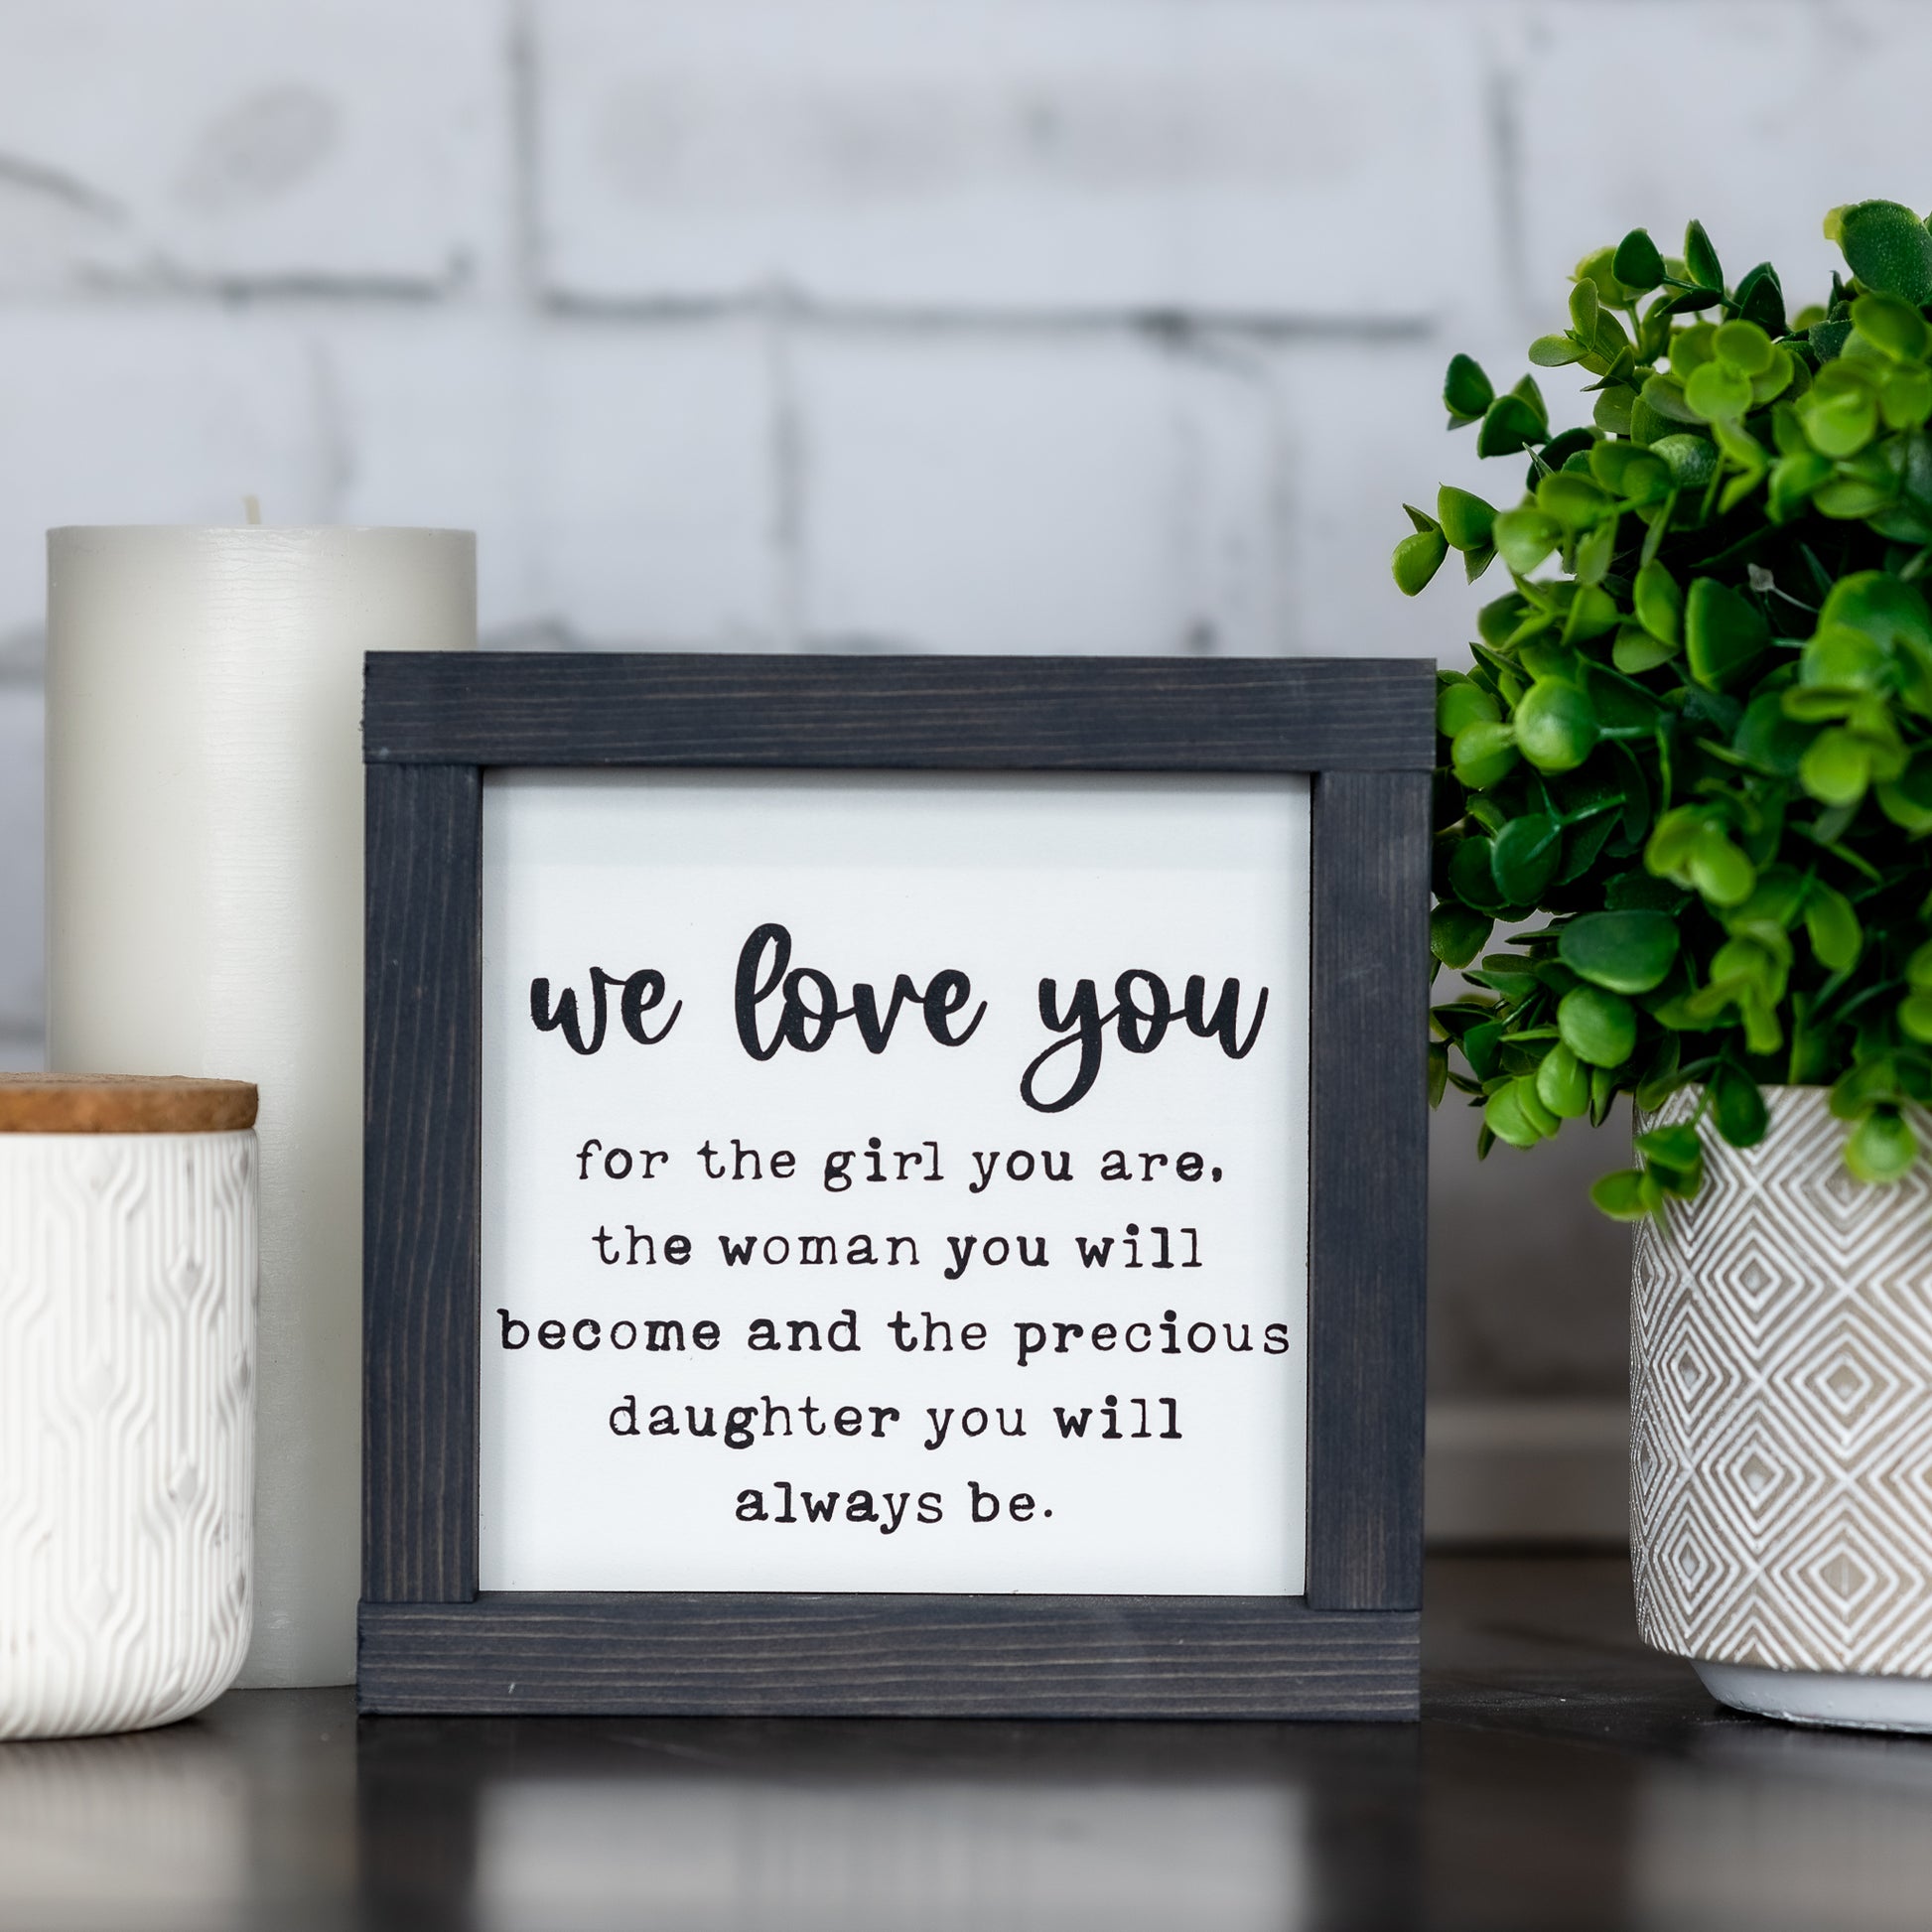 I love you for the girl you are, the woman you will become and the precious daughter you will always be - mini sign